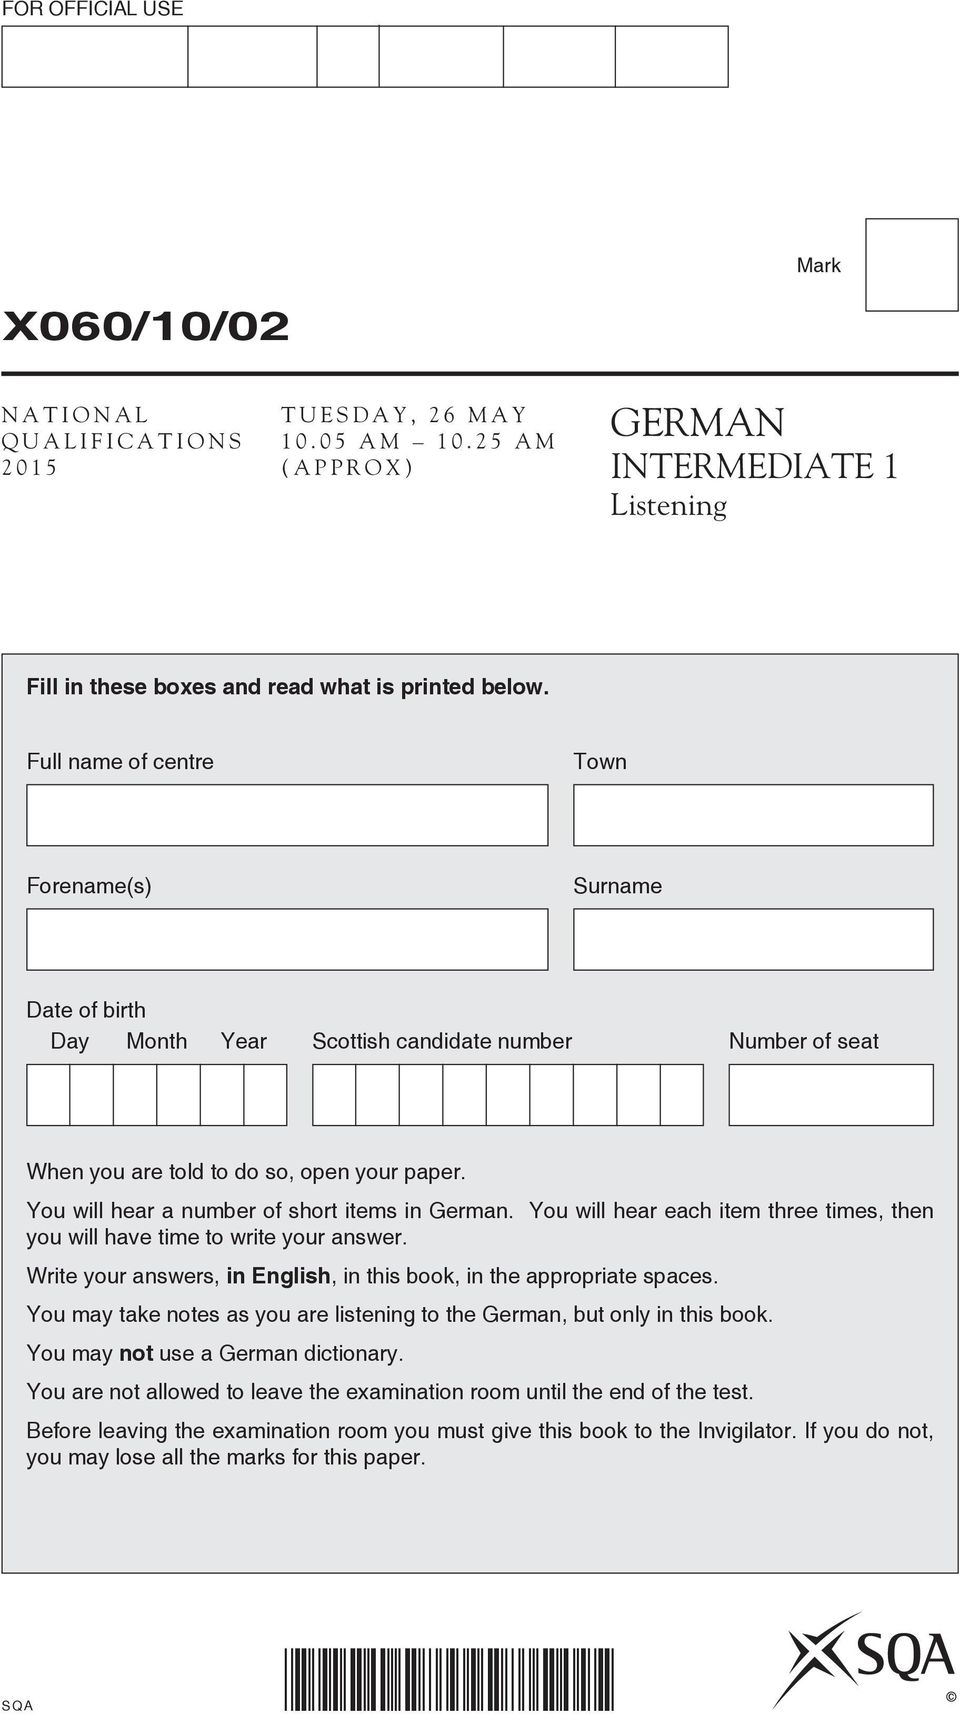 You will hear a number of short items in German. You will hear each item three times, then you will have time to write your answer.